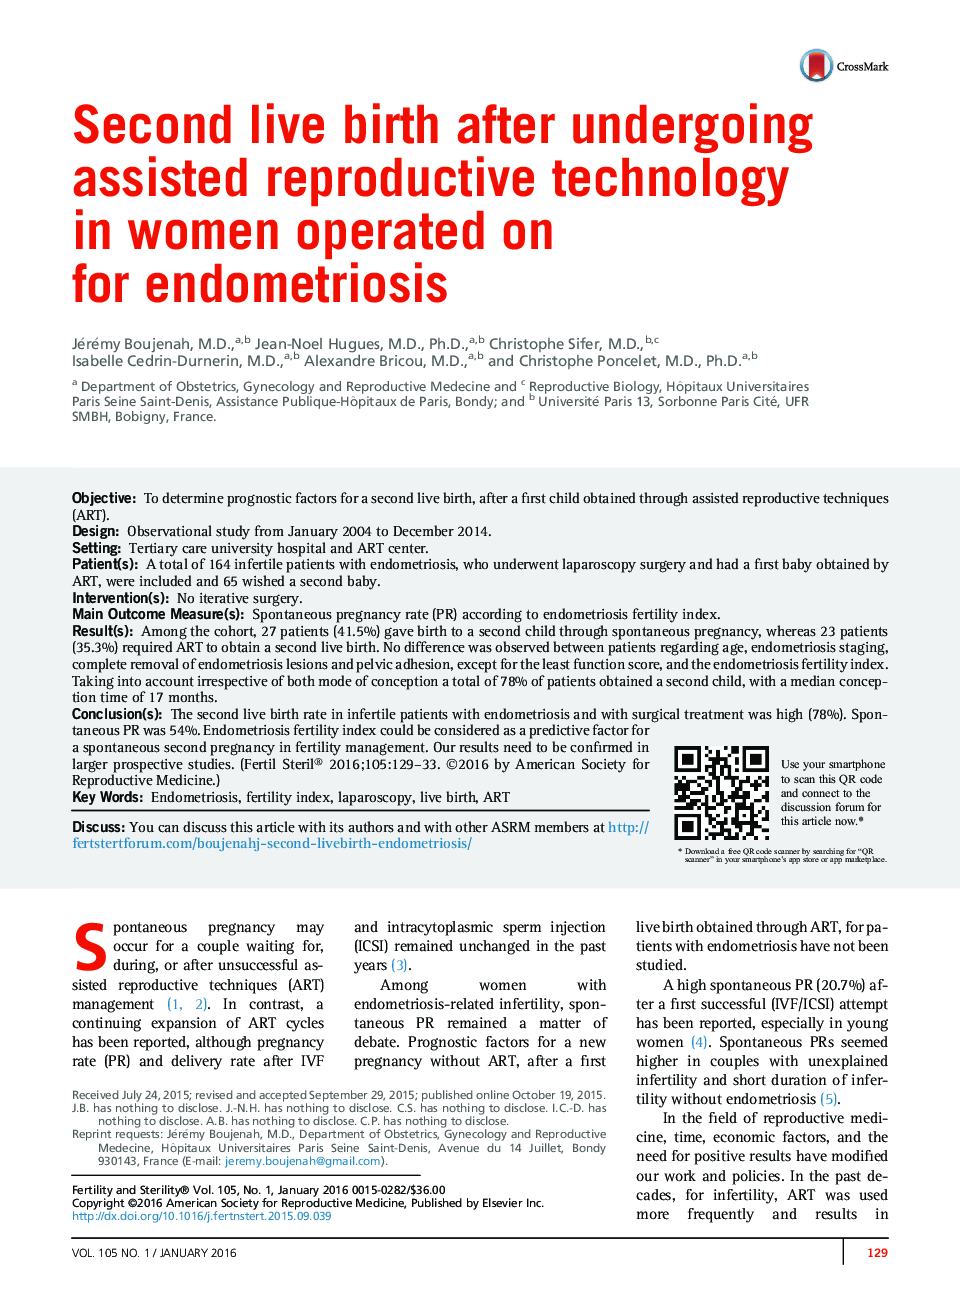 Second live birth after undergoing assisted reproductive technology inÂ women operated on for endometriosis